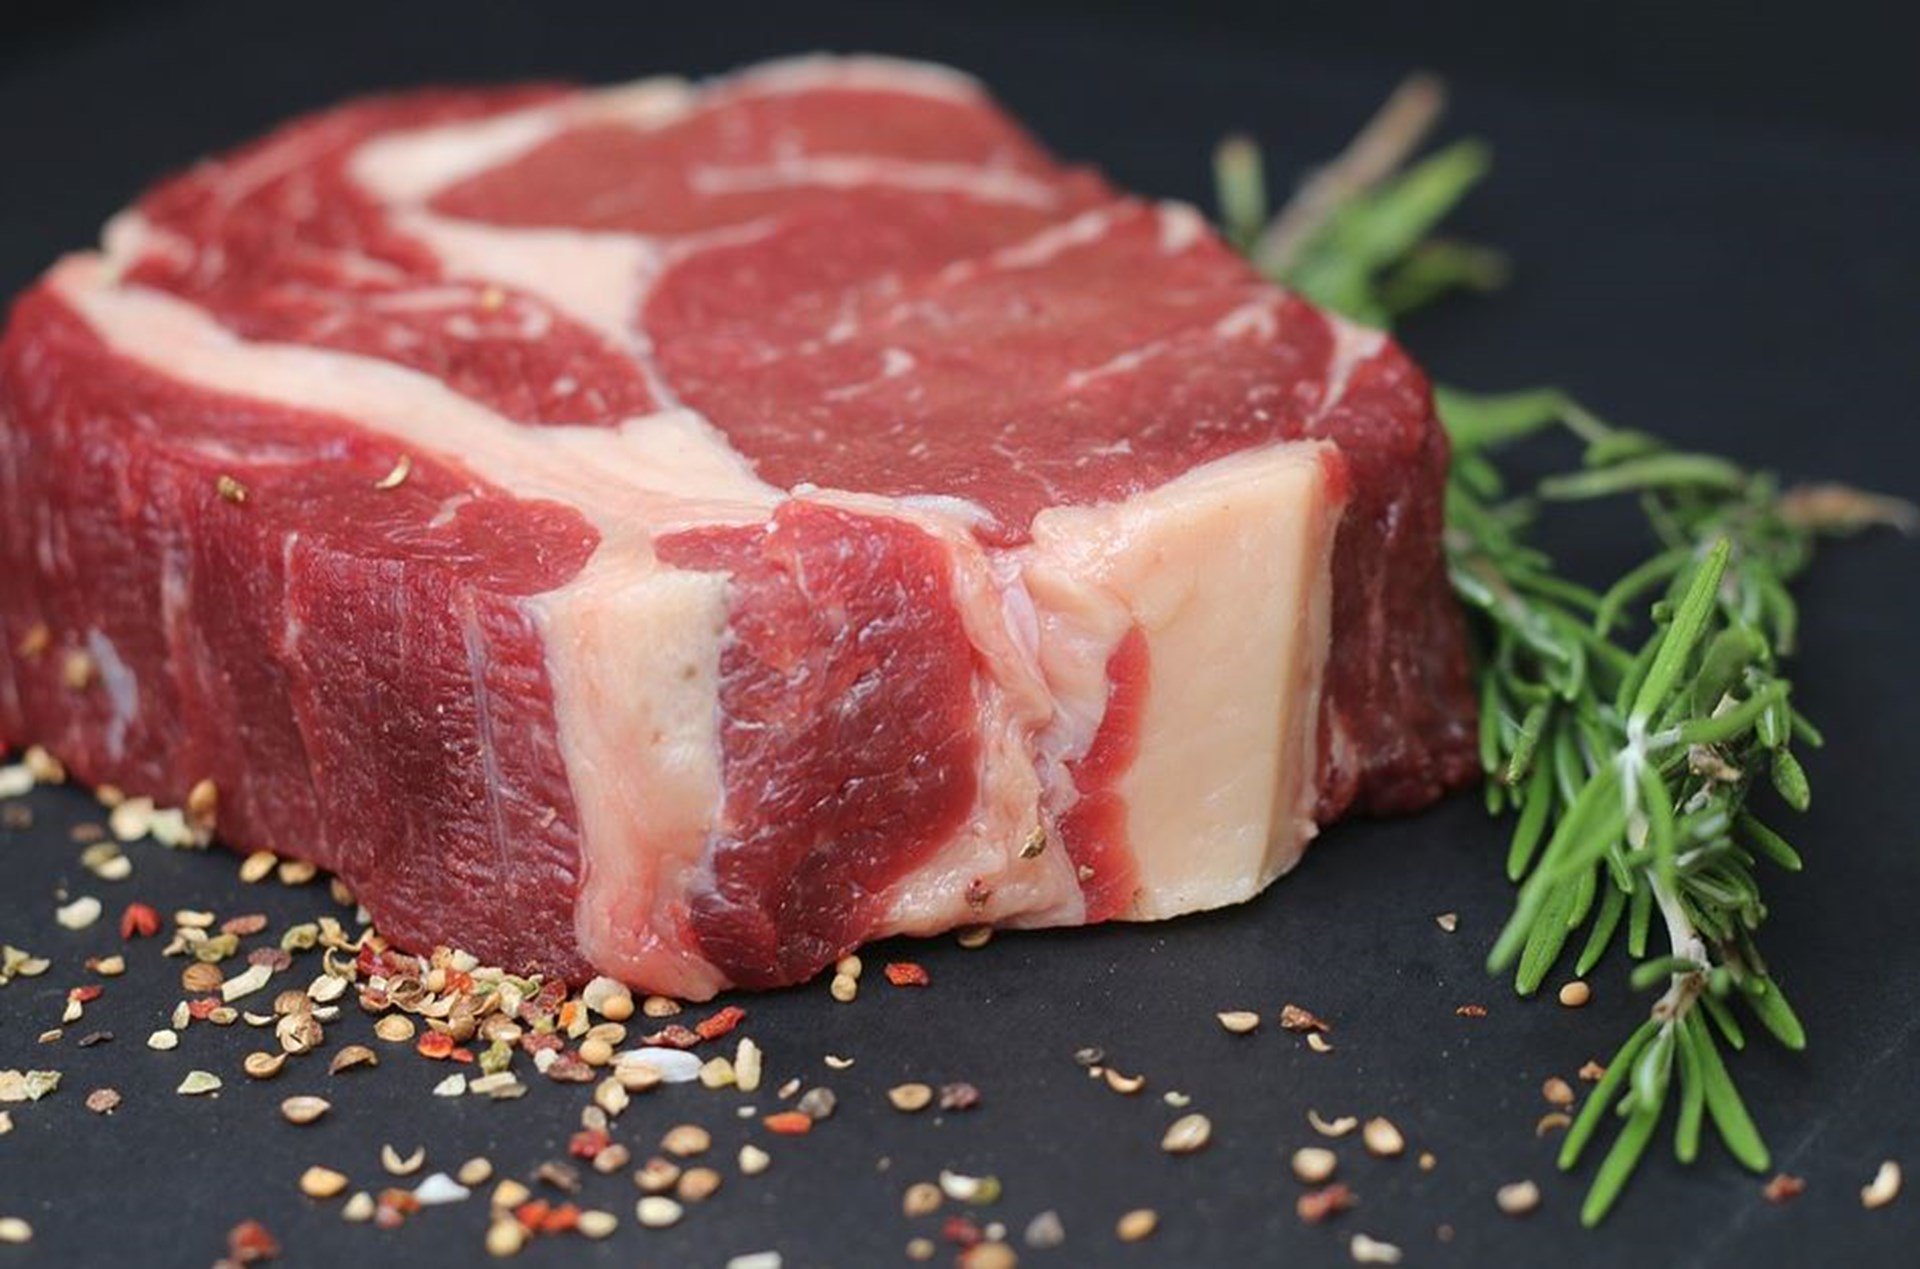 New Proposal to Tax Steak and Bacon to “Save Lives” Is a Really Bad Idea